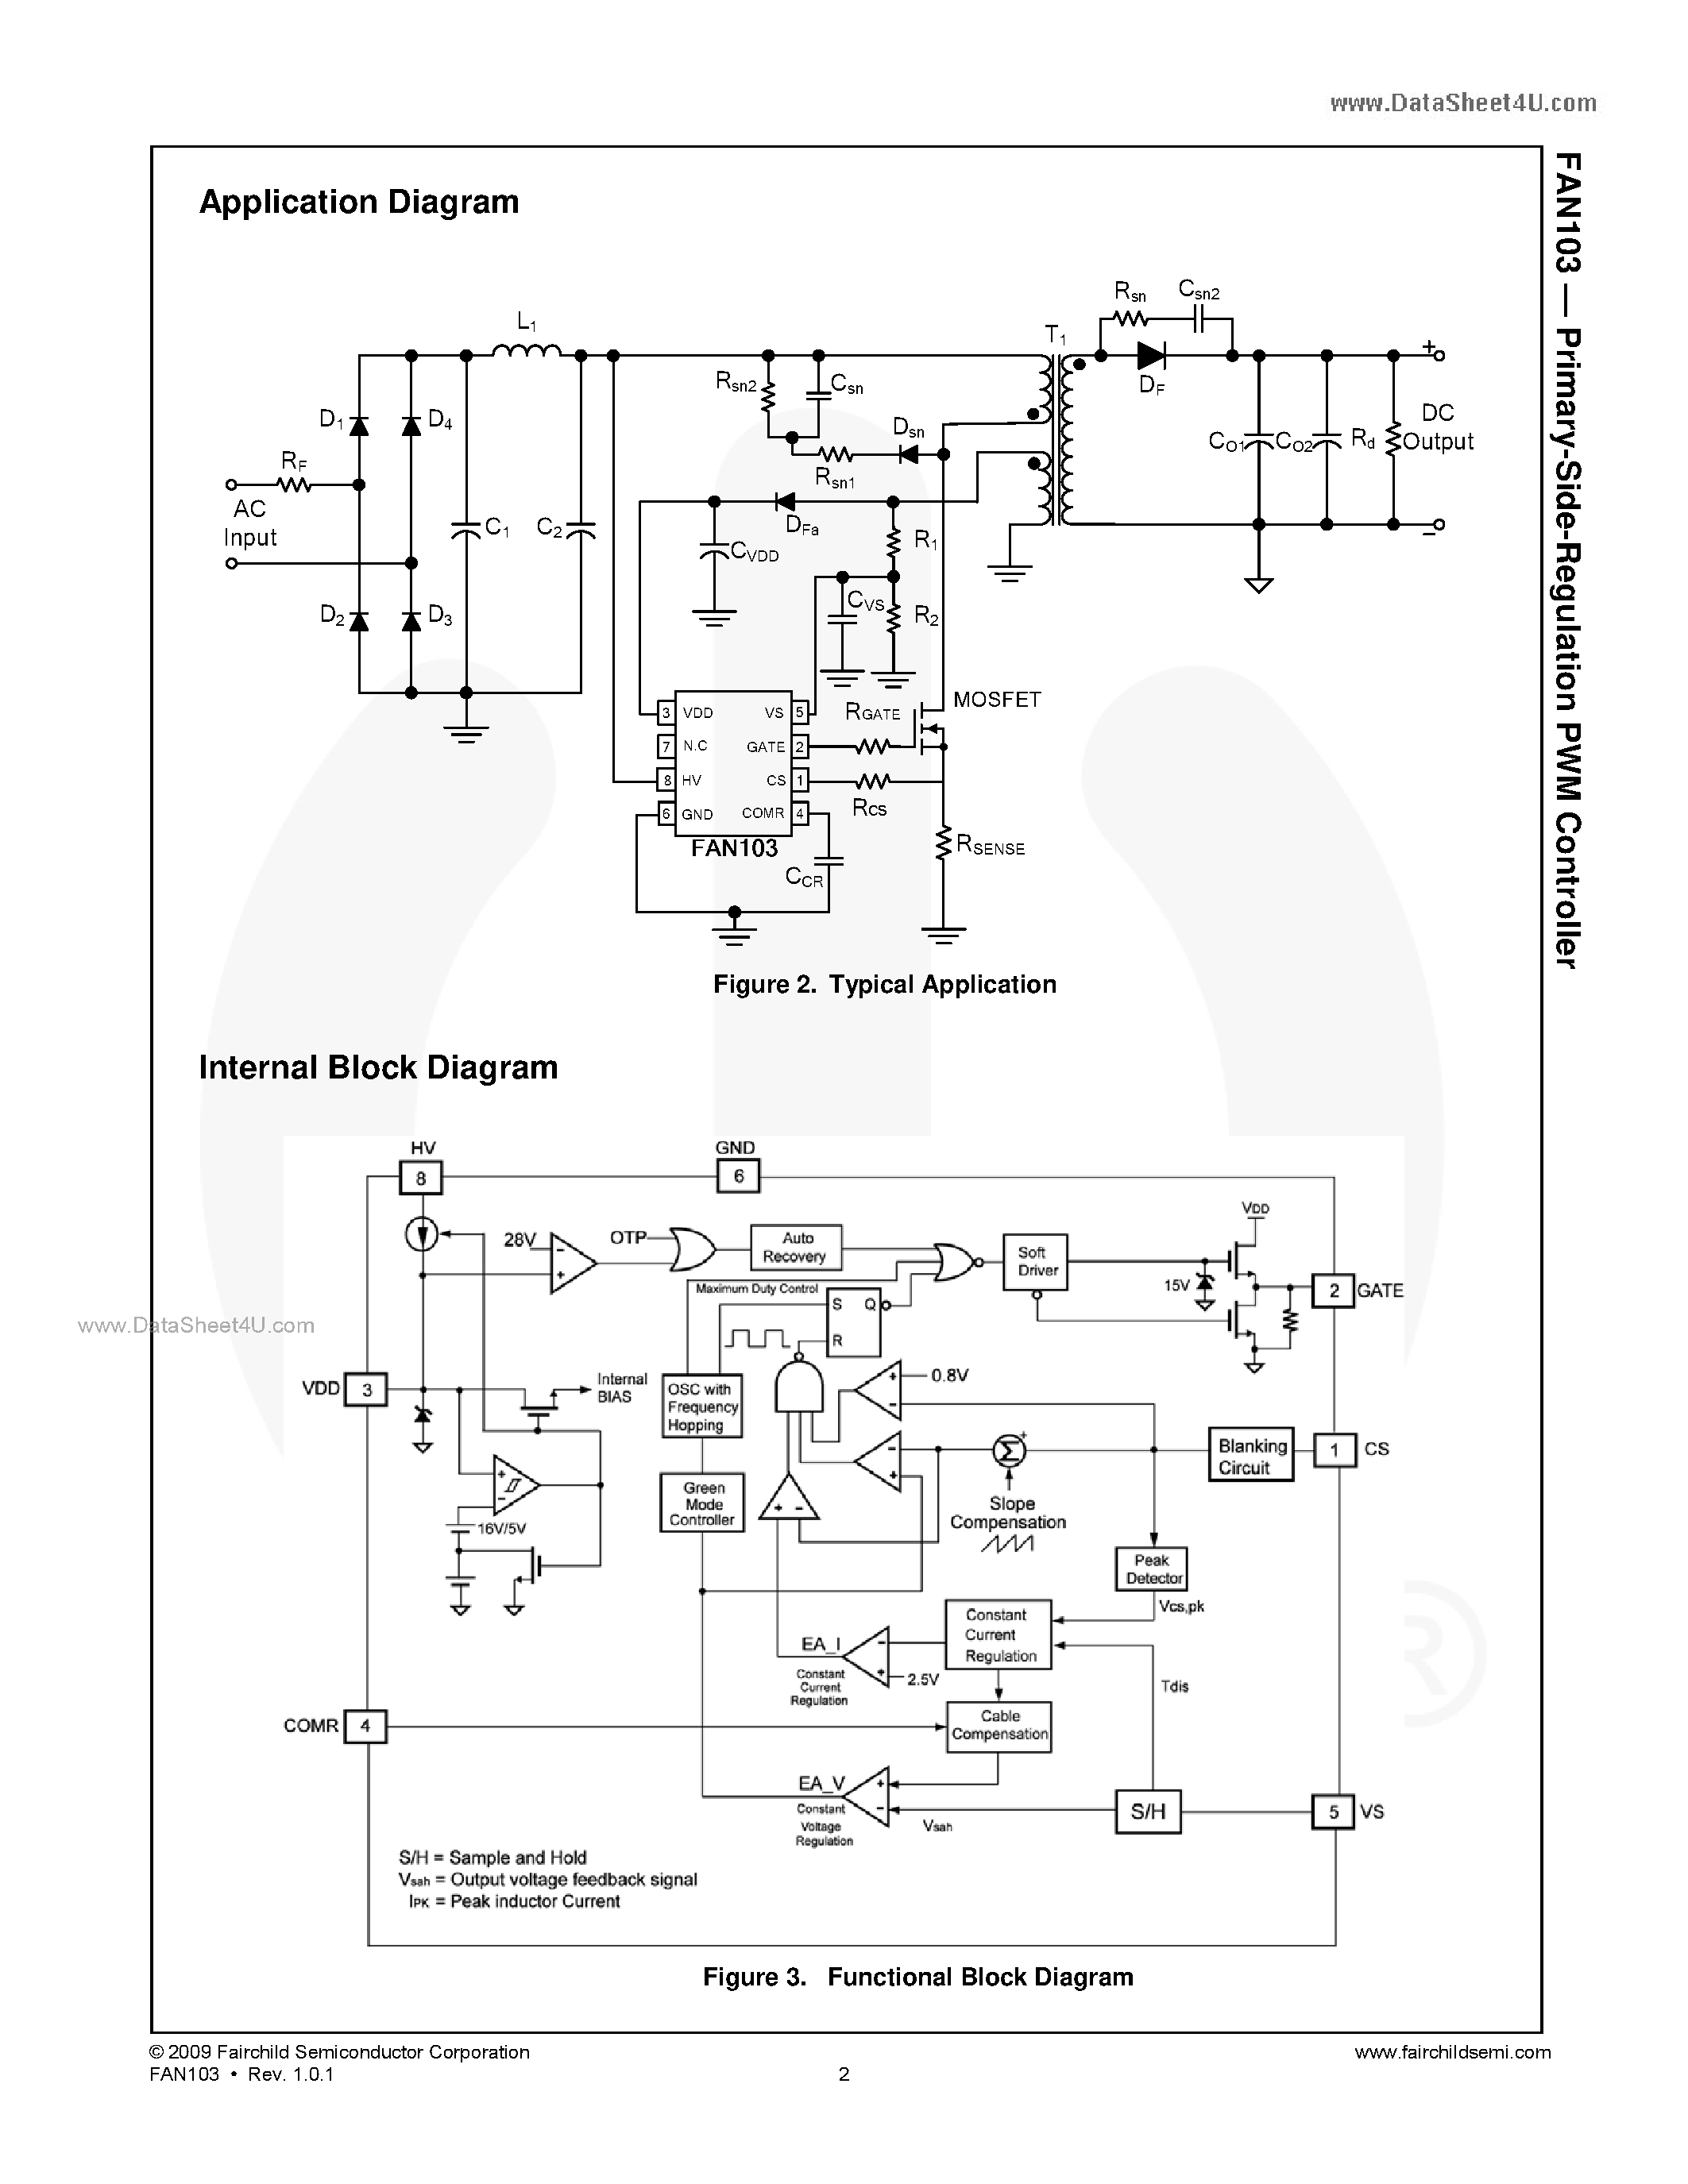 Datasheet FAN103 - Primary-Side-Regulation PWM Controller page 2